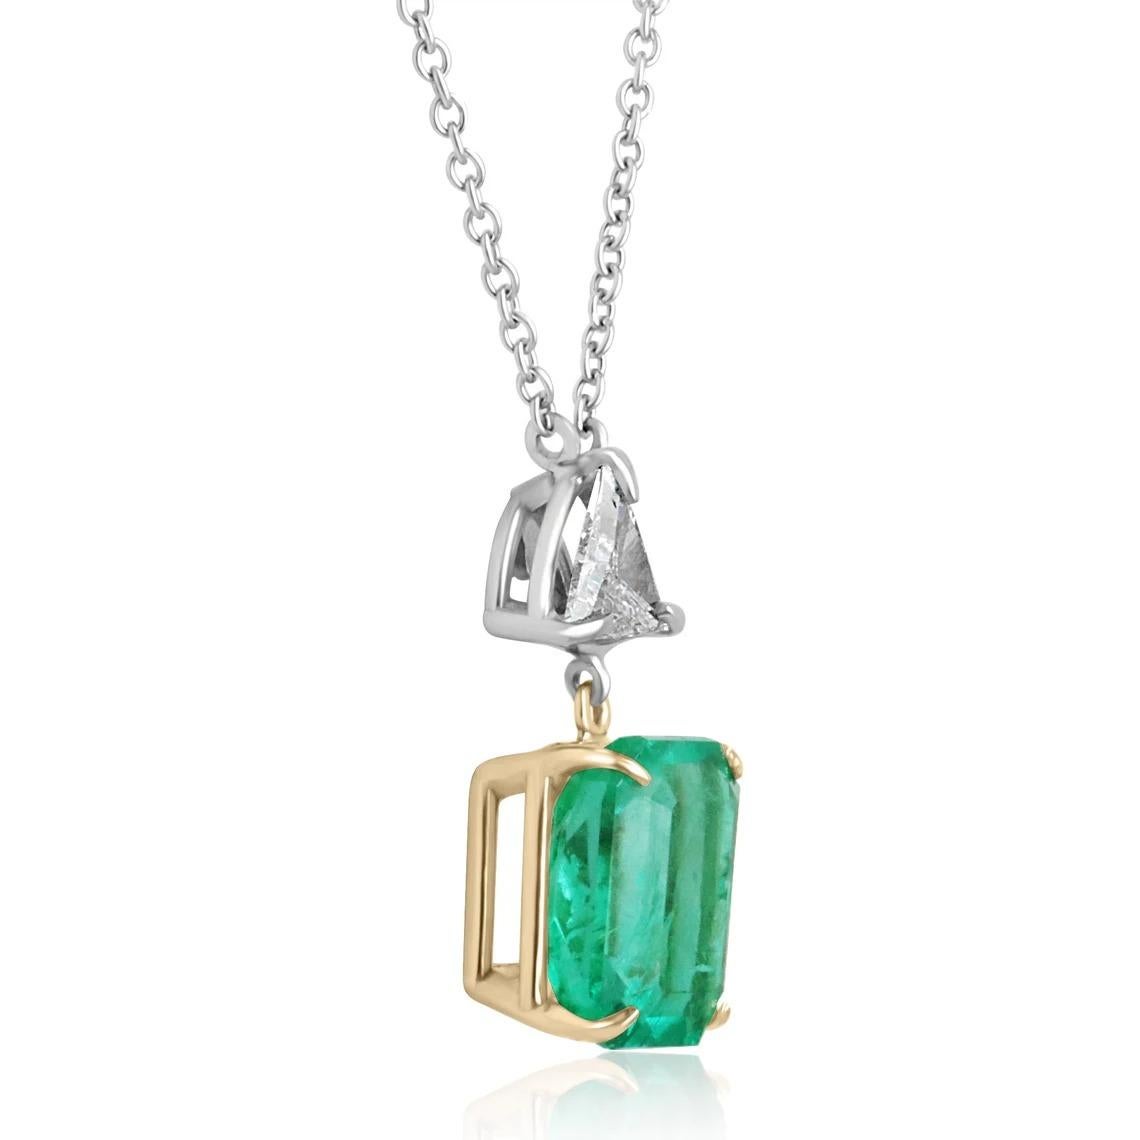 A fine quality Colombian emerald, classic emerald-cut, and trillion diamond necklace. The glowing emerald carries a full 5.12 carat, incandescent Muzo green earth-mined emerald. The stone displays excellent luster and very good eye clarity with